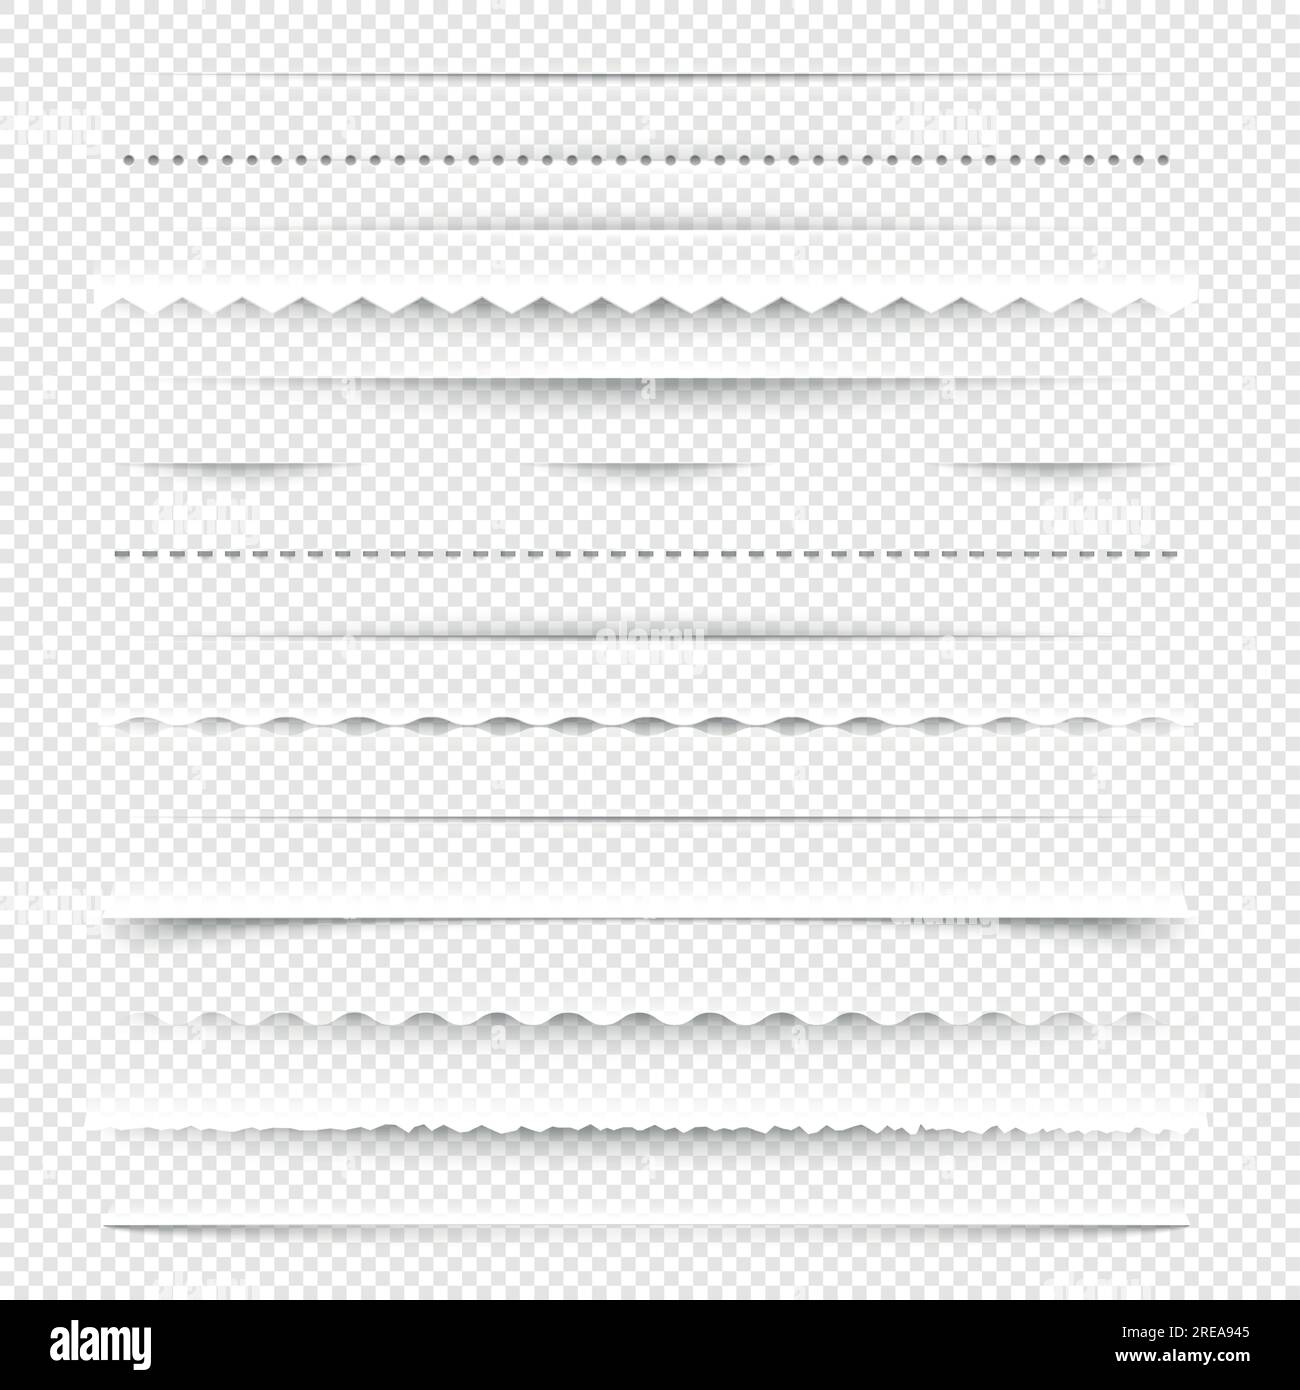 Horizontal dividers. Diagonal borders with holes and gaps for layout design, white stitch line elements. Vector isolated set Stock Vector